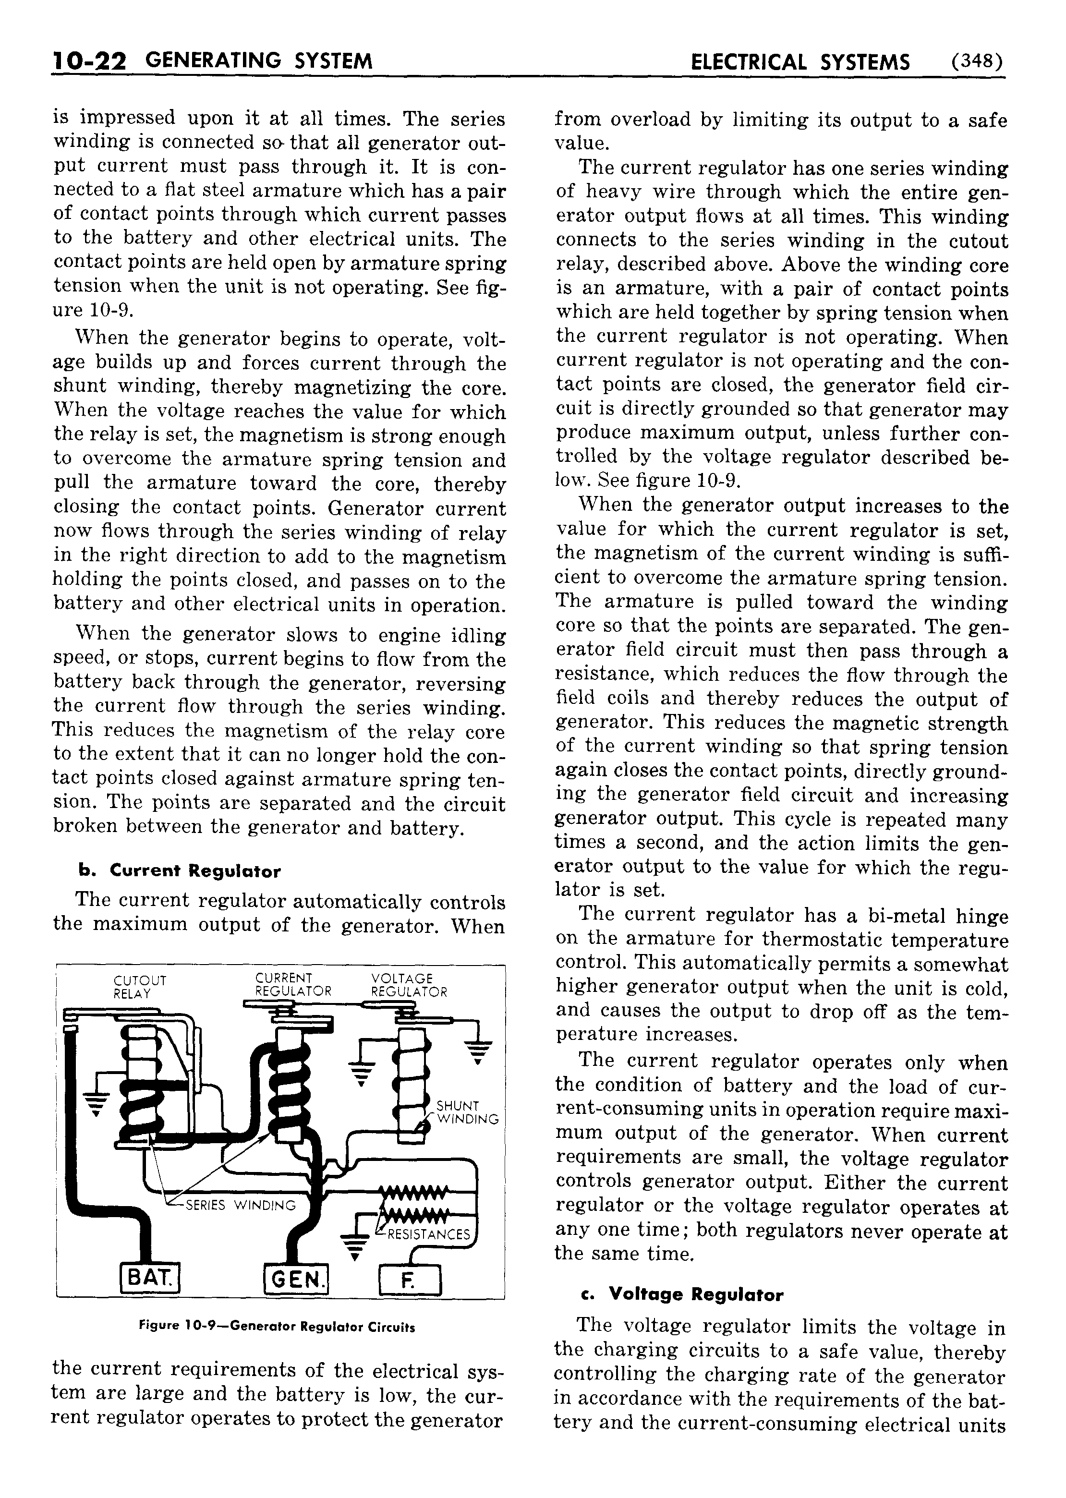 n_11 1956 Buick Shop Manual - Electrical Systems-022-022.jpg